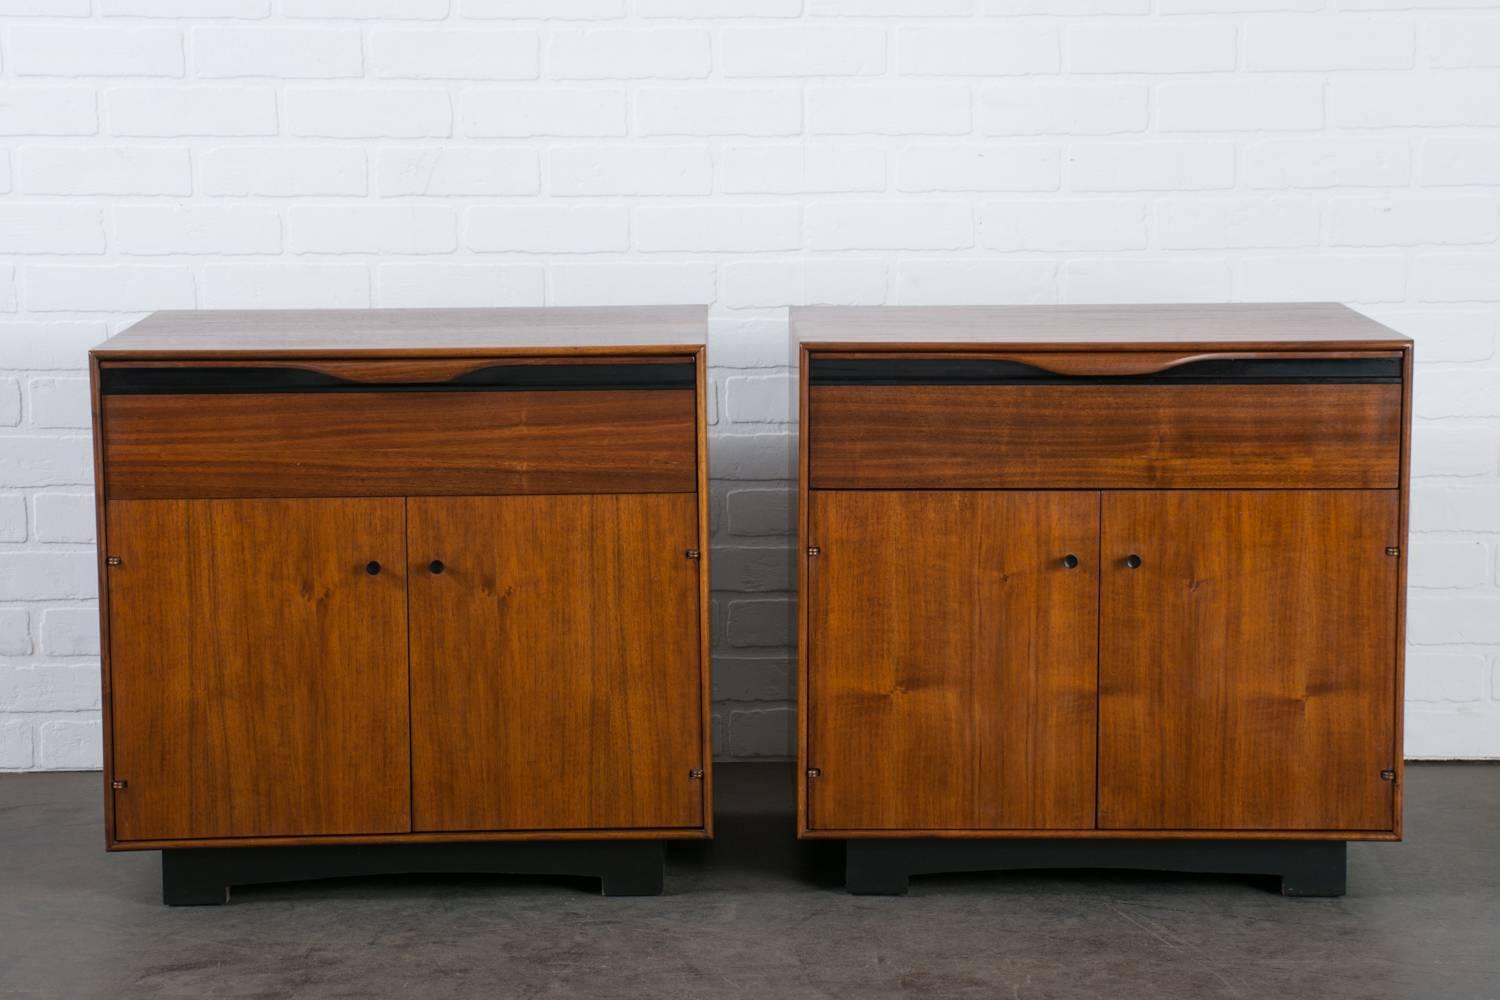 These Mid-Century Modern walnut nightstands were designed by John Kapel for Glenn of California in the 1960s. Each cabinet features one drawer and two doors that conceal a storage space with one adjustable shelf. The black details contrast